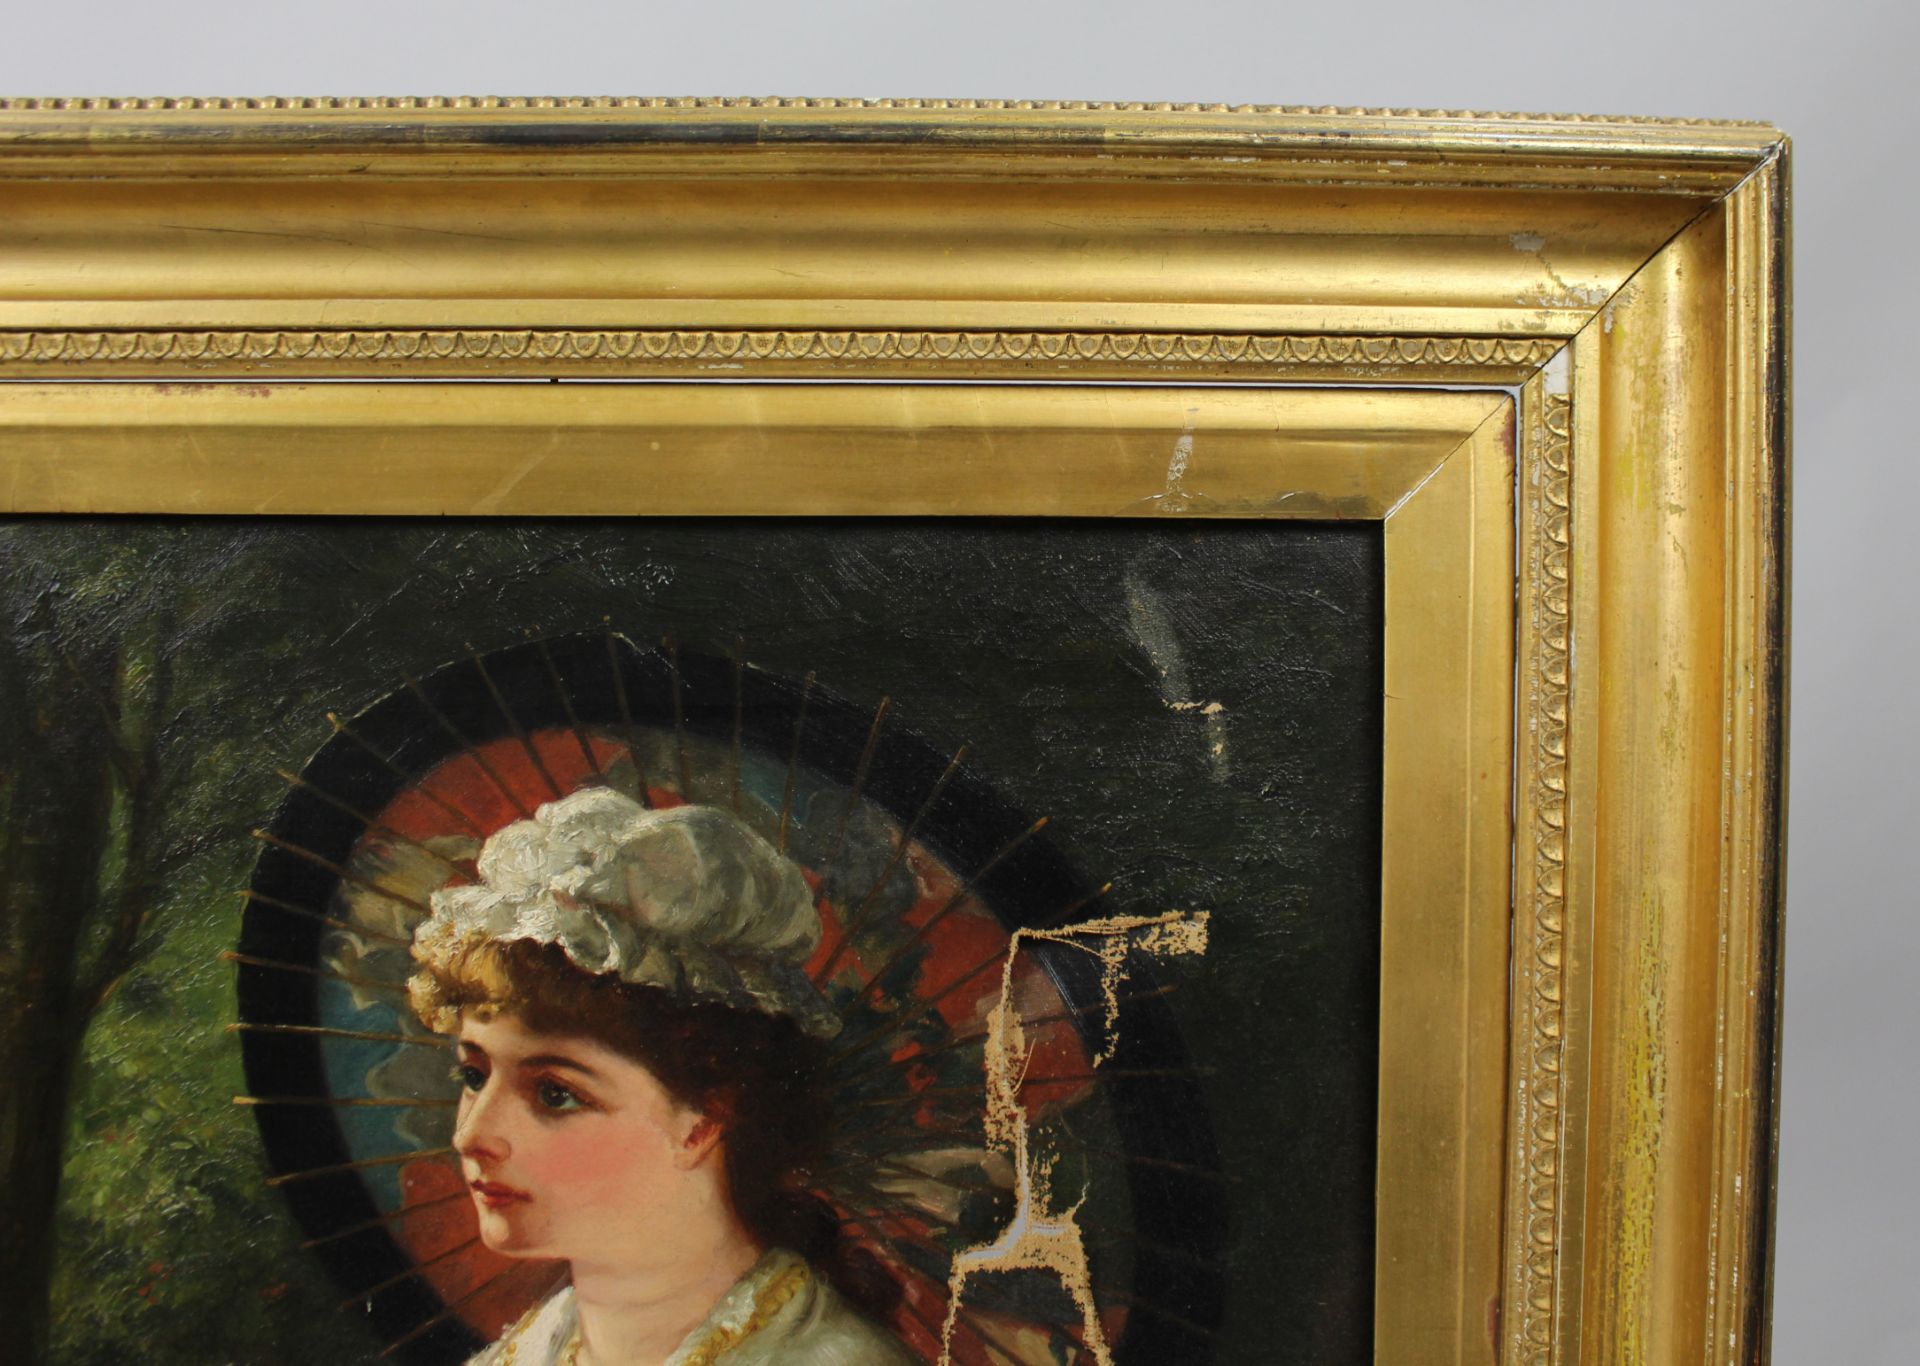 Beatrice Offor Victorian Bride Oil on Canvas Damaged - Image 5 of 8